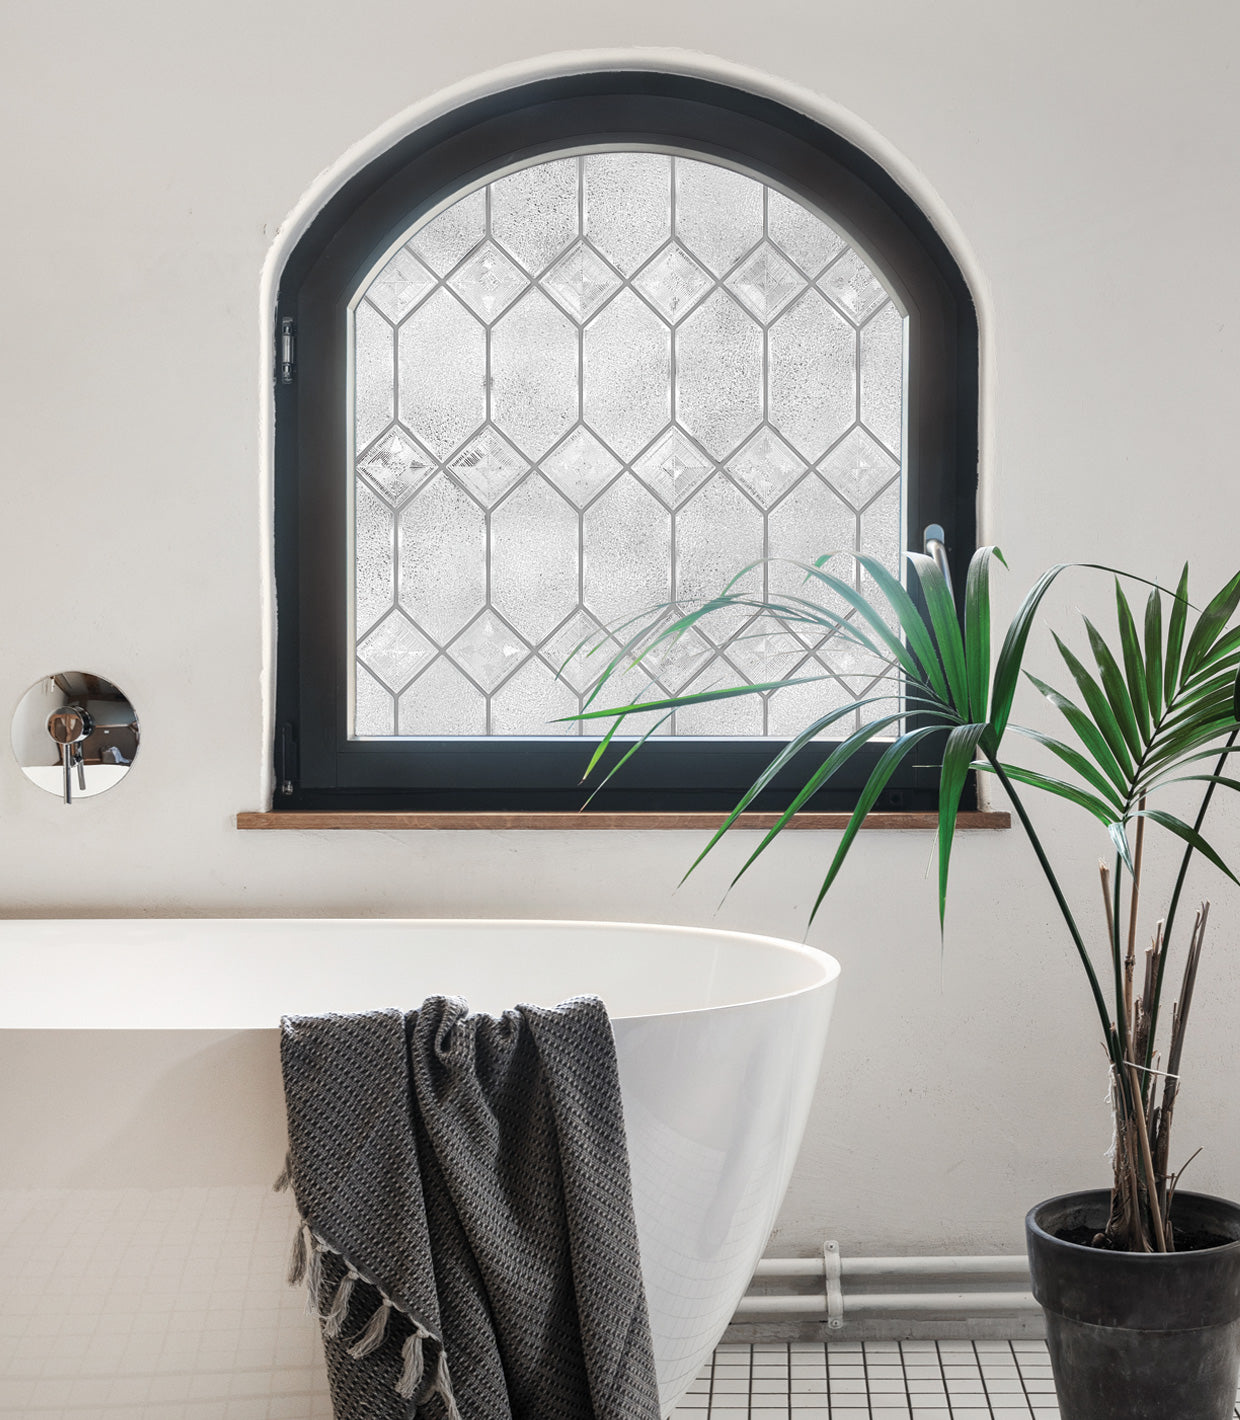 Modern, elegant bathroom featuring half of a white porcelain bathtub, tiled floor, and a potted palm plant. The room includes a window with a black frame and wooden sill, topped with a curved arch, enhanced with Artscape's Old English window film for classic appeal and privacy.